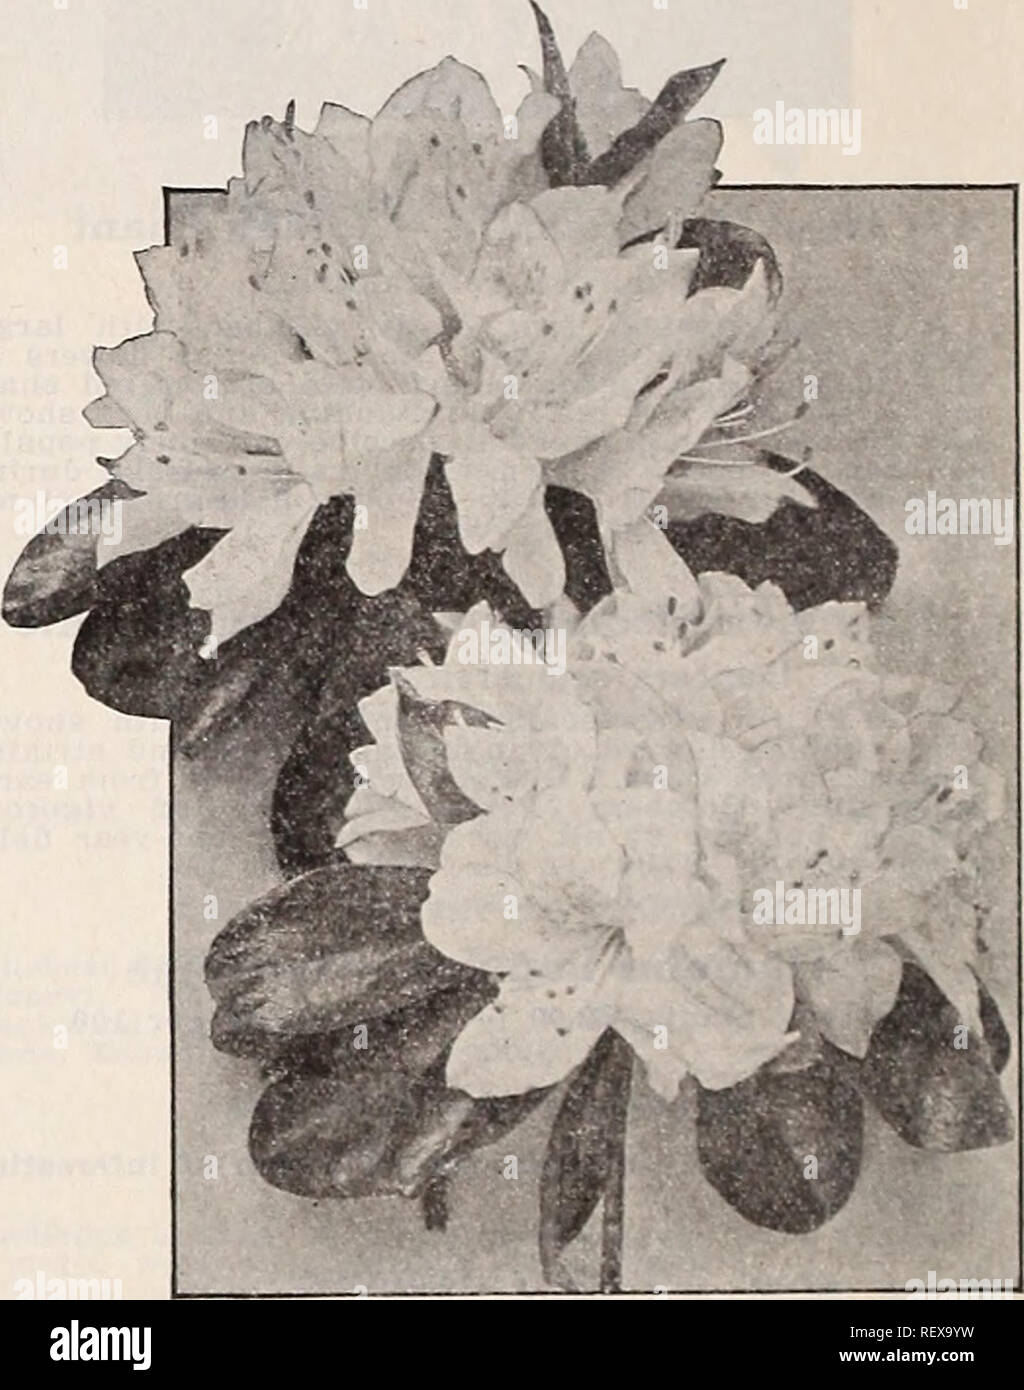 . Dreer's wholesale catalog for florists : winter - spring - summer 1938. Bulbs (Plants) Catalogs; Vegetables Seeds Catalogs; Flowers Seeds Catalogs; Nurseries (Horticulture) Catalogs; Gardening Equipment and supplies Catalogs. Asparagus Sprengeri . $1.00 per doz.: $6.00 per 10( DREERS ^' IOOth . ANNIVERSARY^ f Agapanthus umbellatus Agapanthus Umbellatus. Strong plants in 6-inch pots. 75c each. Strong plants in 8-inch tubs, $2.00 each. Agl&lt; laonema UodeBttuu (Chinese Evergreen). Showy rich green leaves. A choice house plant that may be grown In soil or in bowls filled with water. 3-inch pot Stock Photo